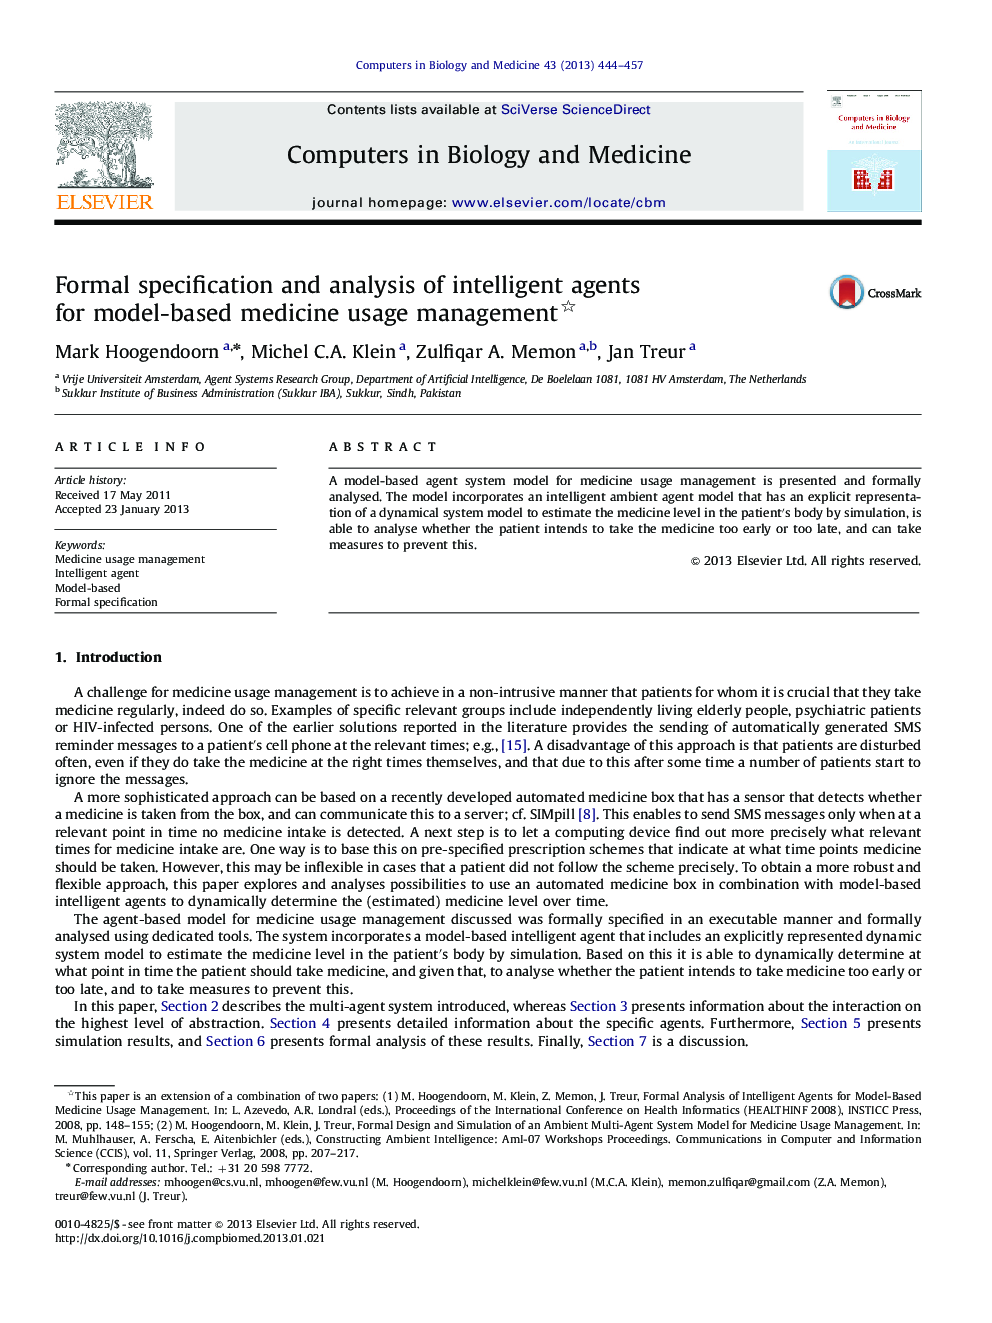 Formal specification and analysis of intelligent agents for model-based medicine usage management 